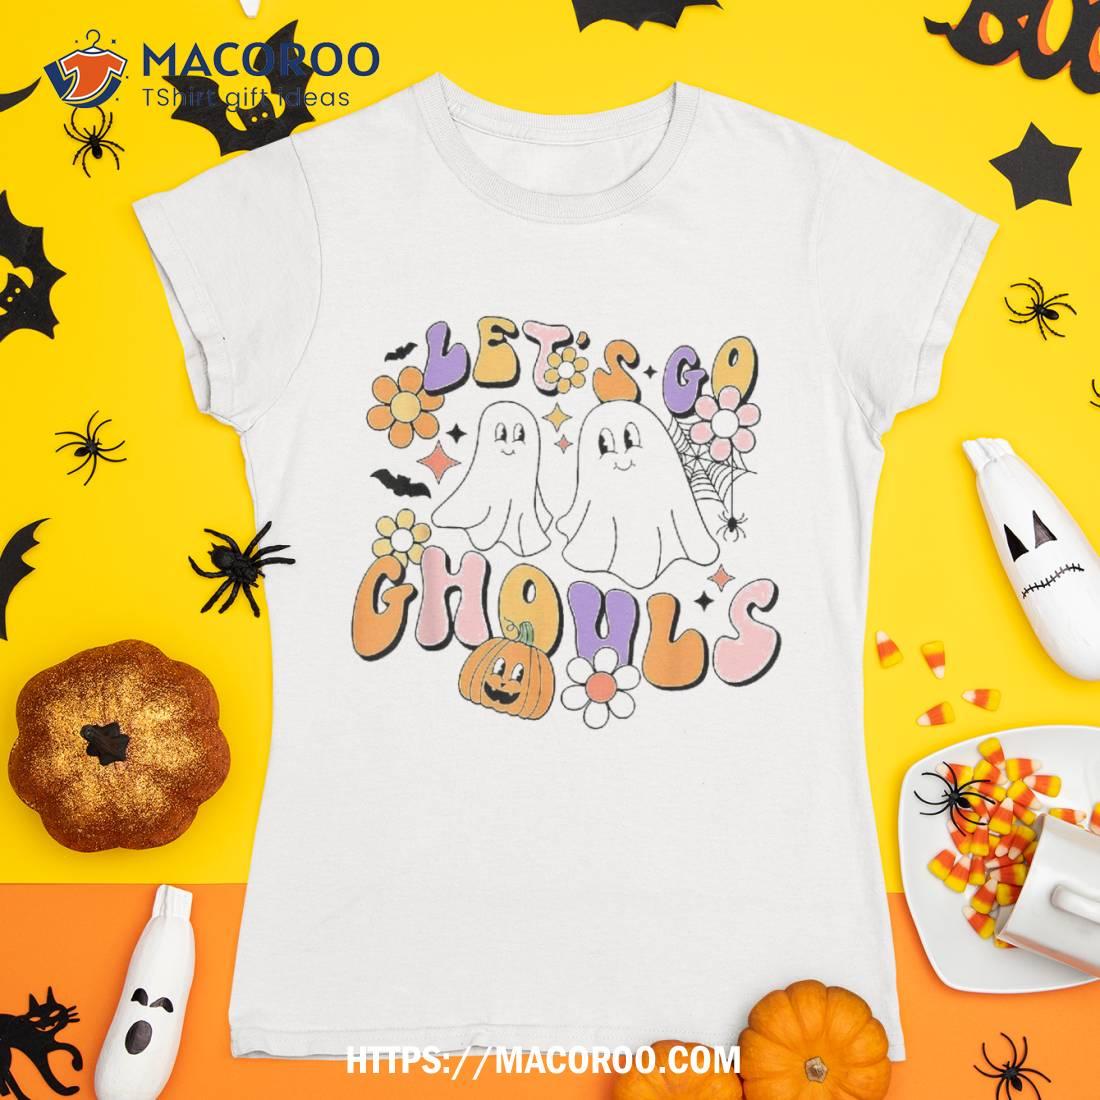 Groovy Let S Go Ghouls Halloween Ghost Outfit For Girl Shirt Skeleton Masks Tshirt 1